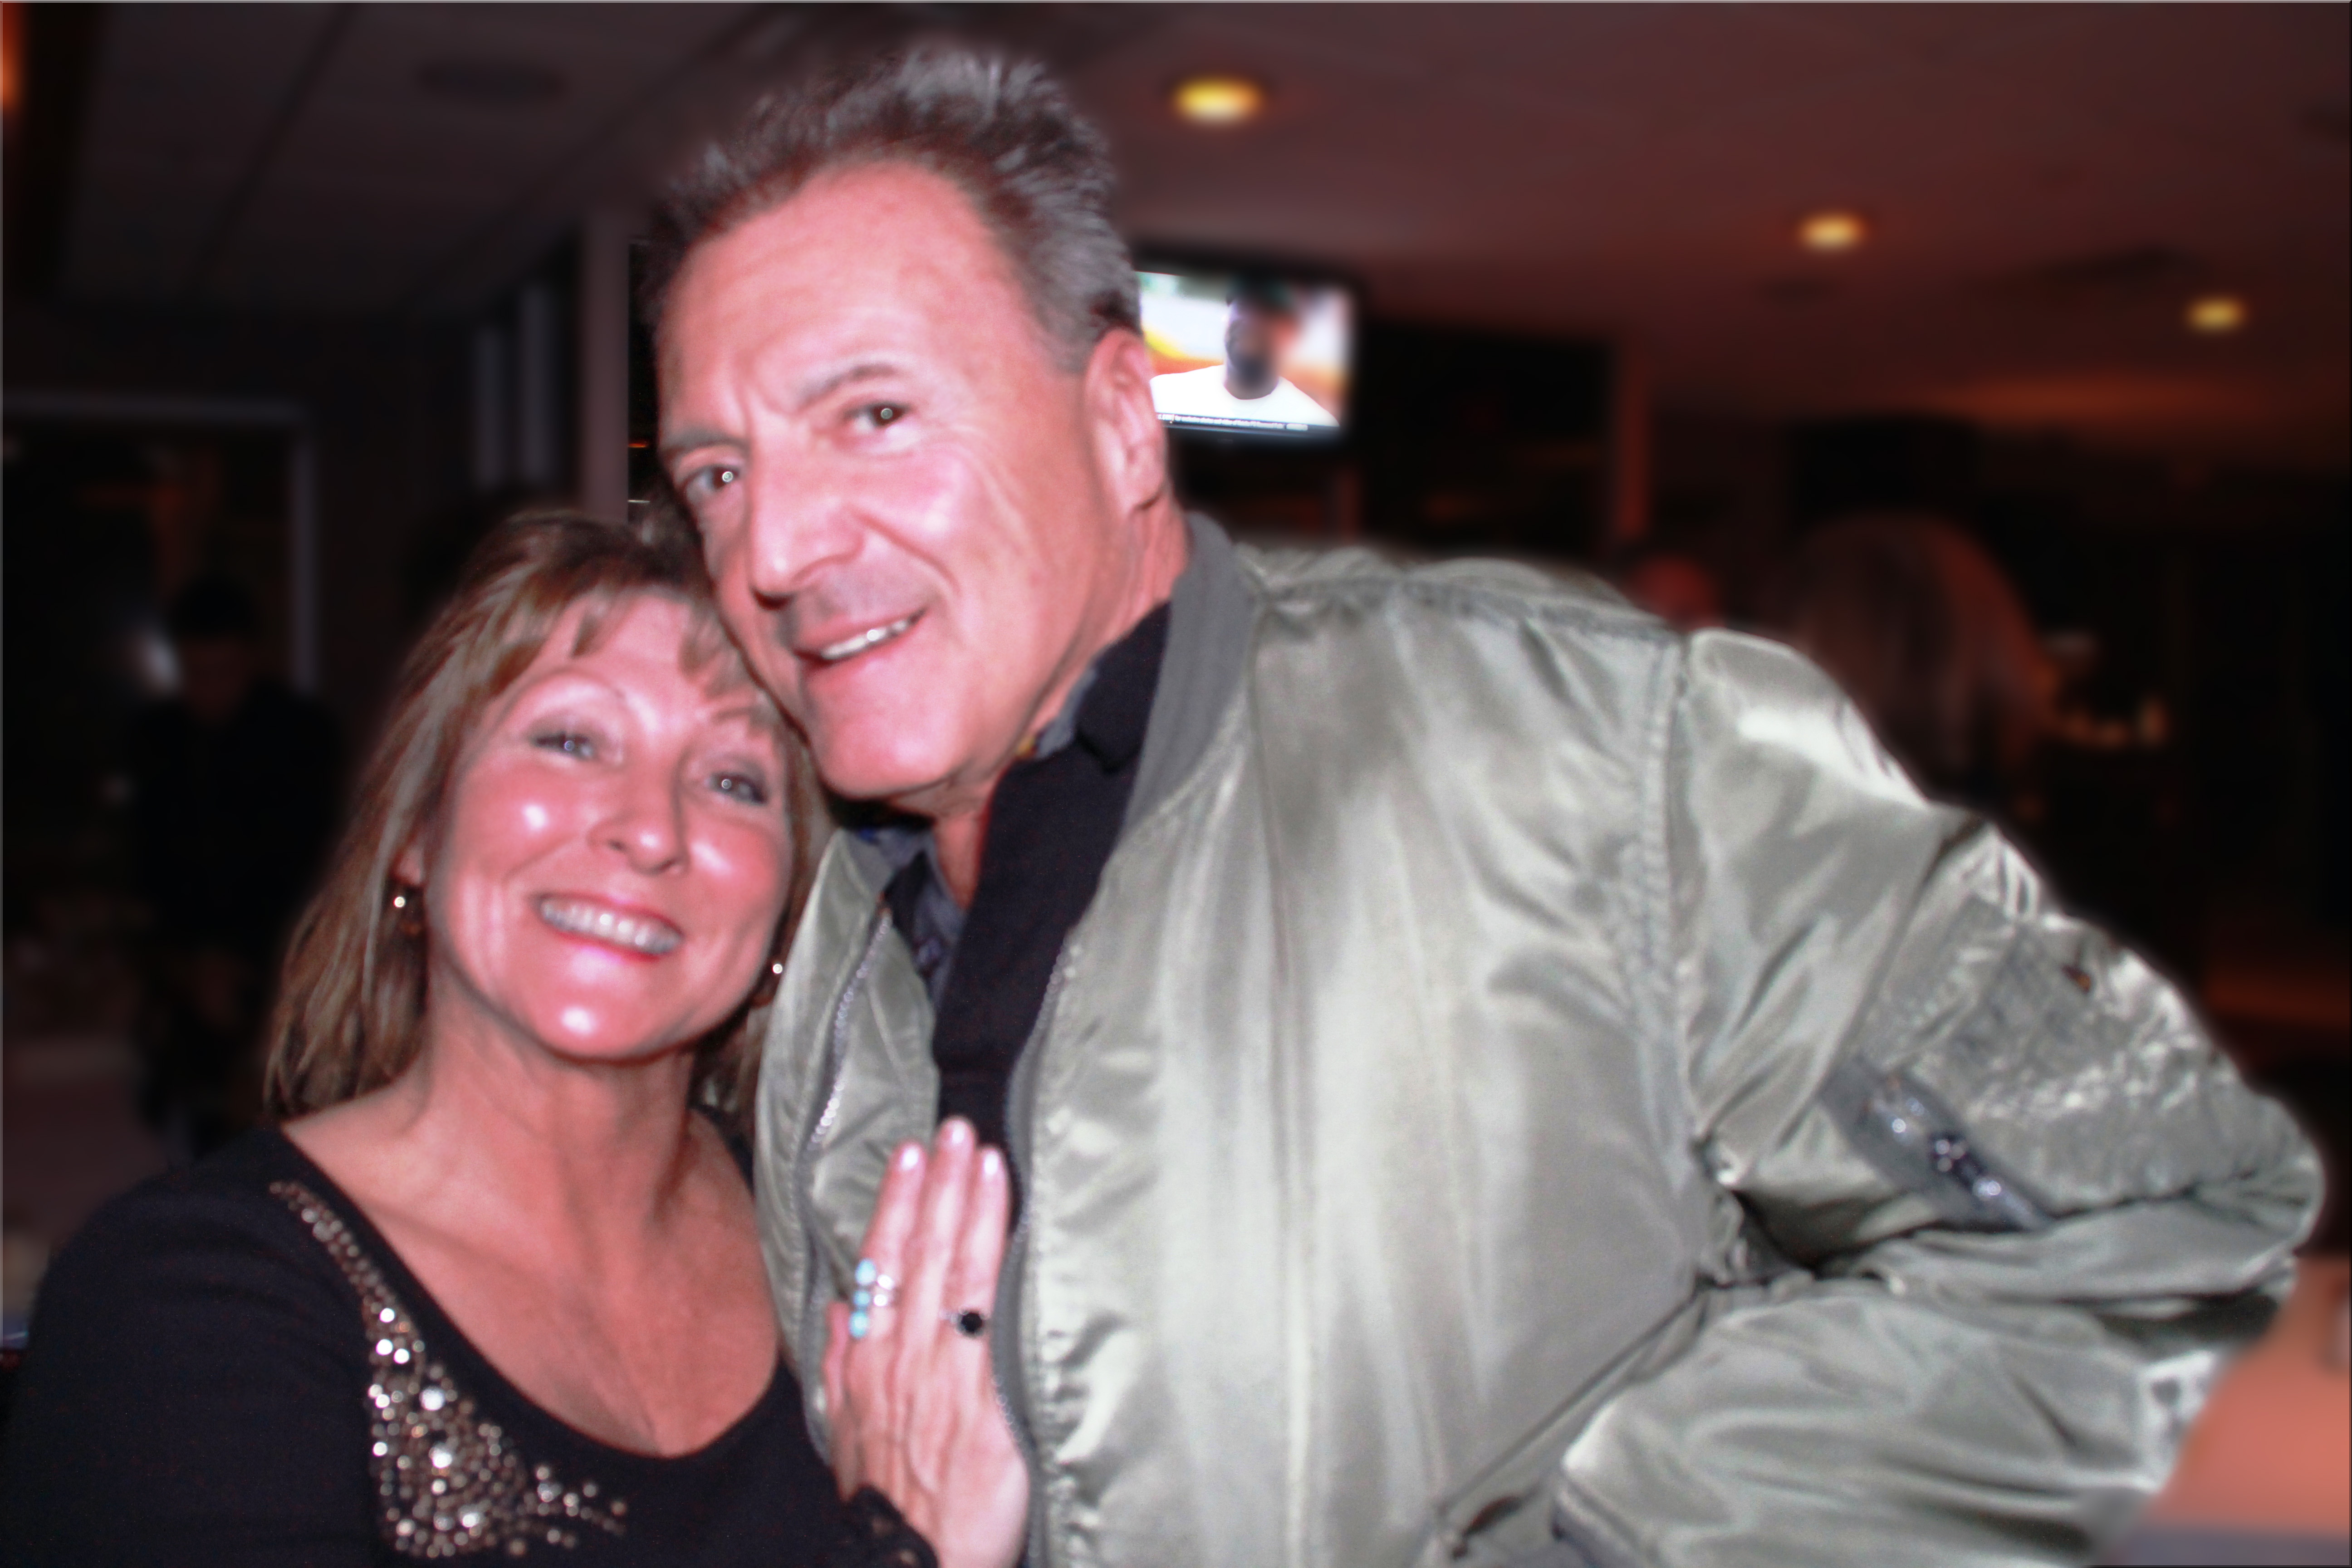 Pleasure to work with ACTOR Armand Assante again on the set of CHARLIE MANTLE